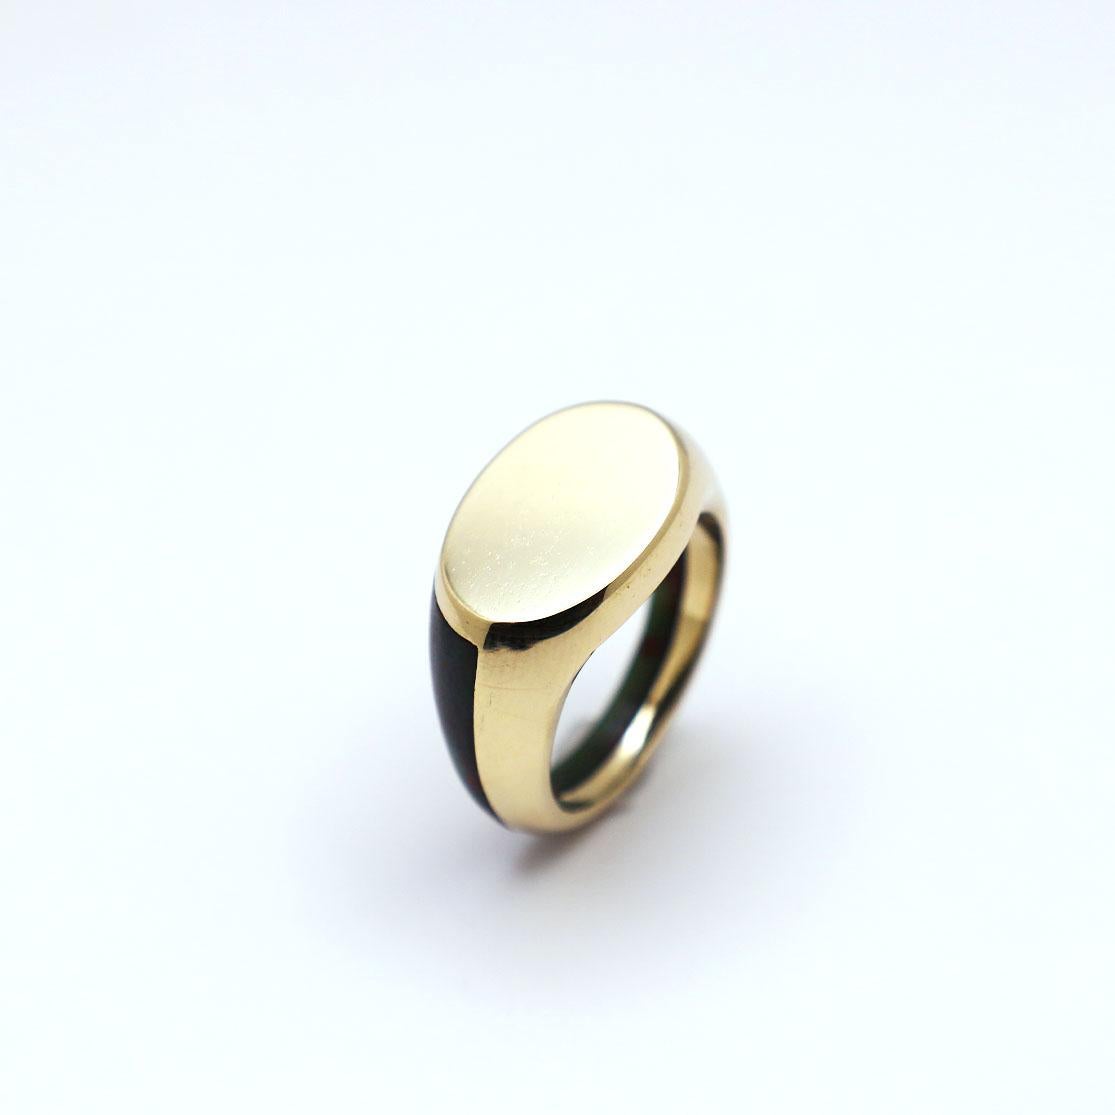 Gold and Bloodstone Signet Ring by KRSN Studio

This contemporary piece combines the traditional signet and hololith rings. The piece features a half gold, half bloodstone body for a striking yet minimal silhouette.

Angelo Jones is a Barbadian born